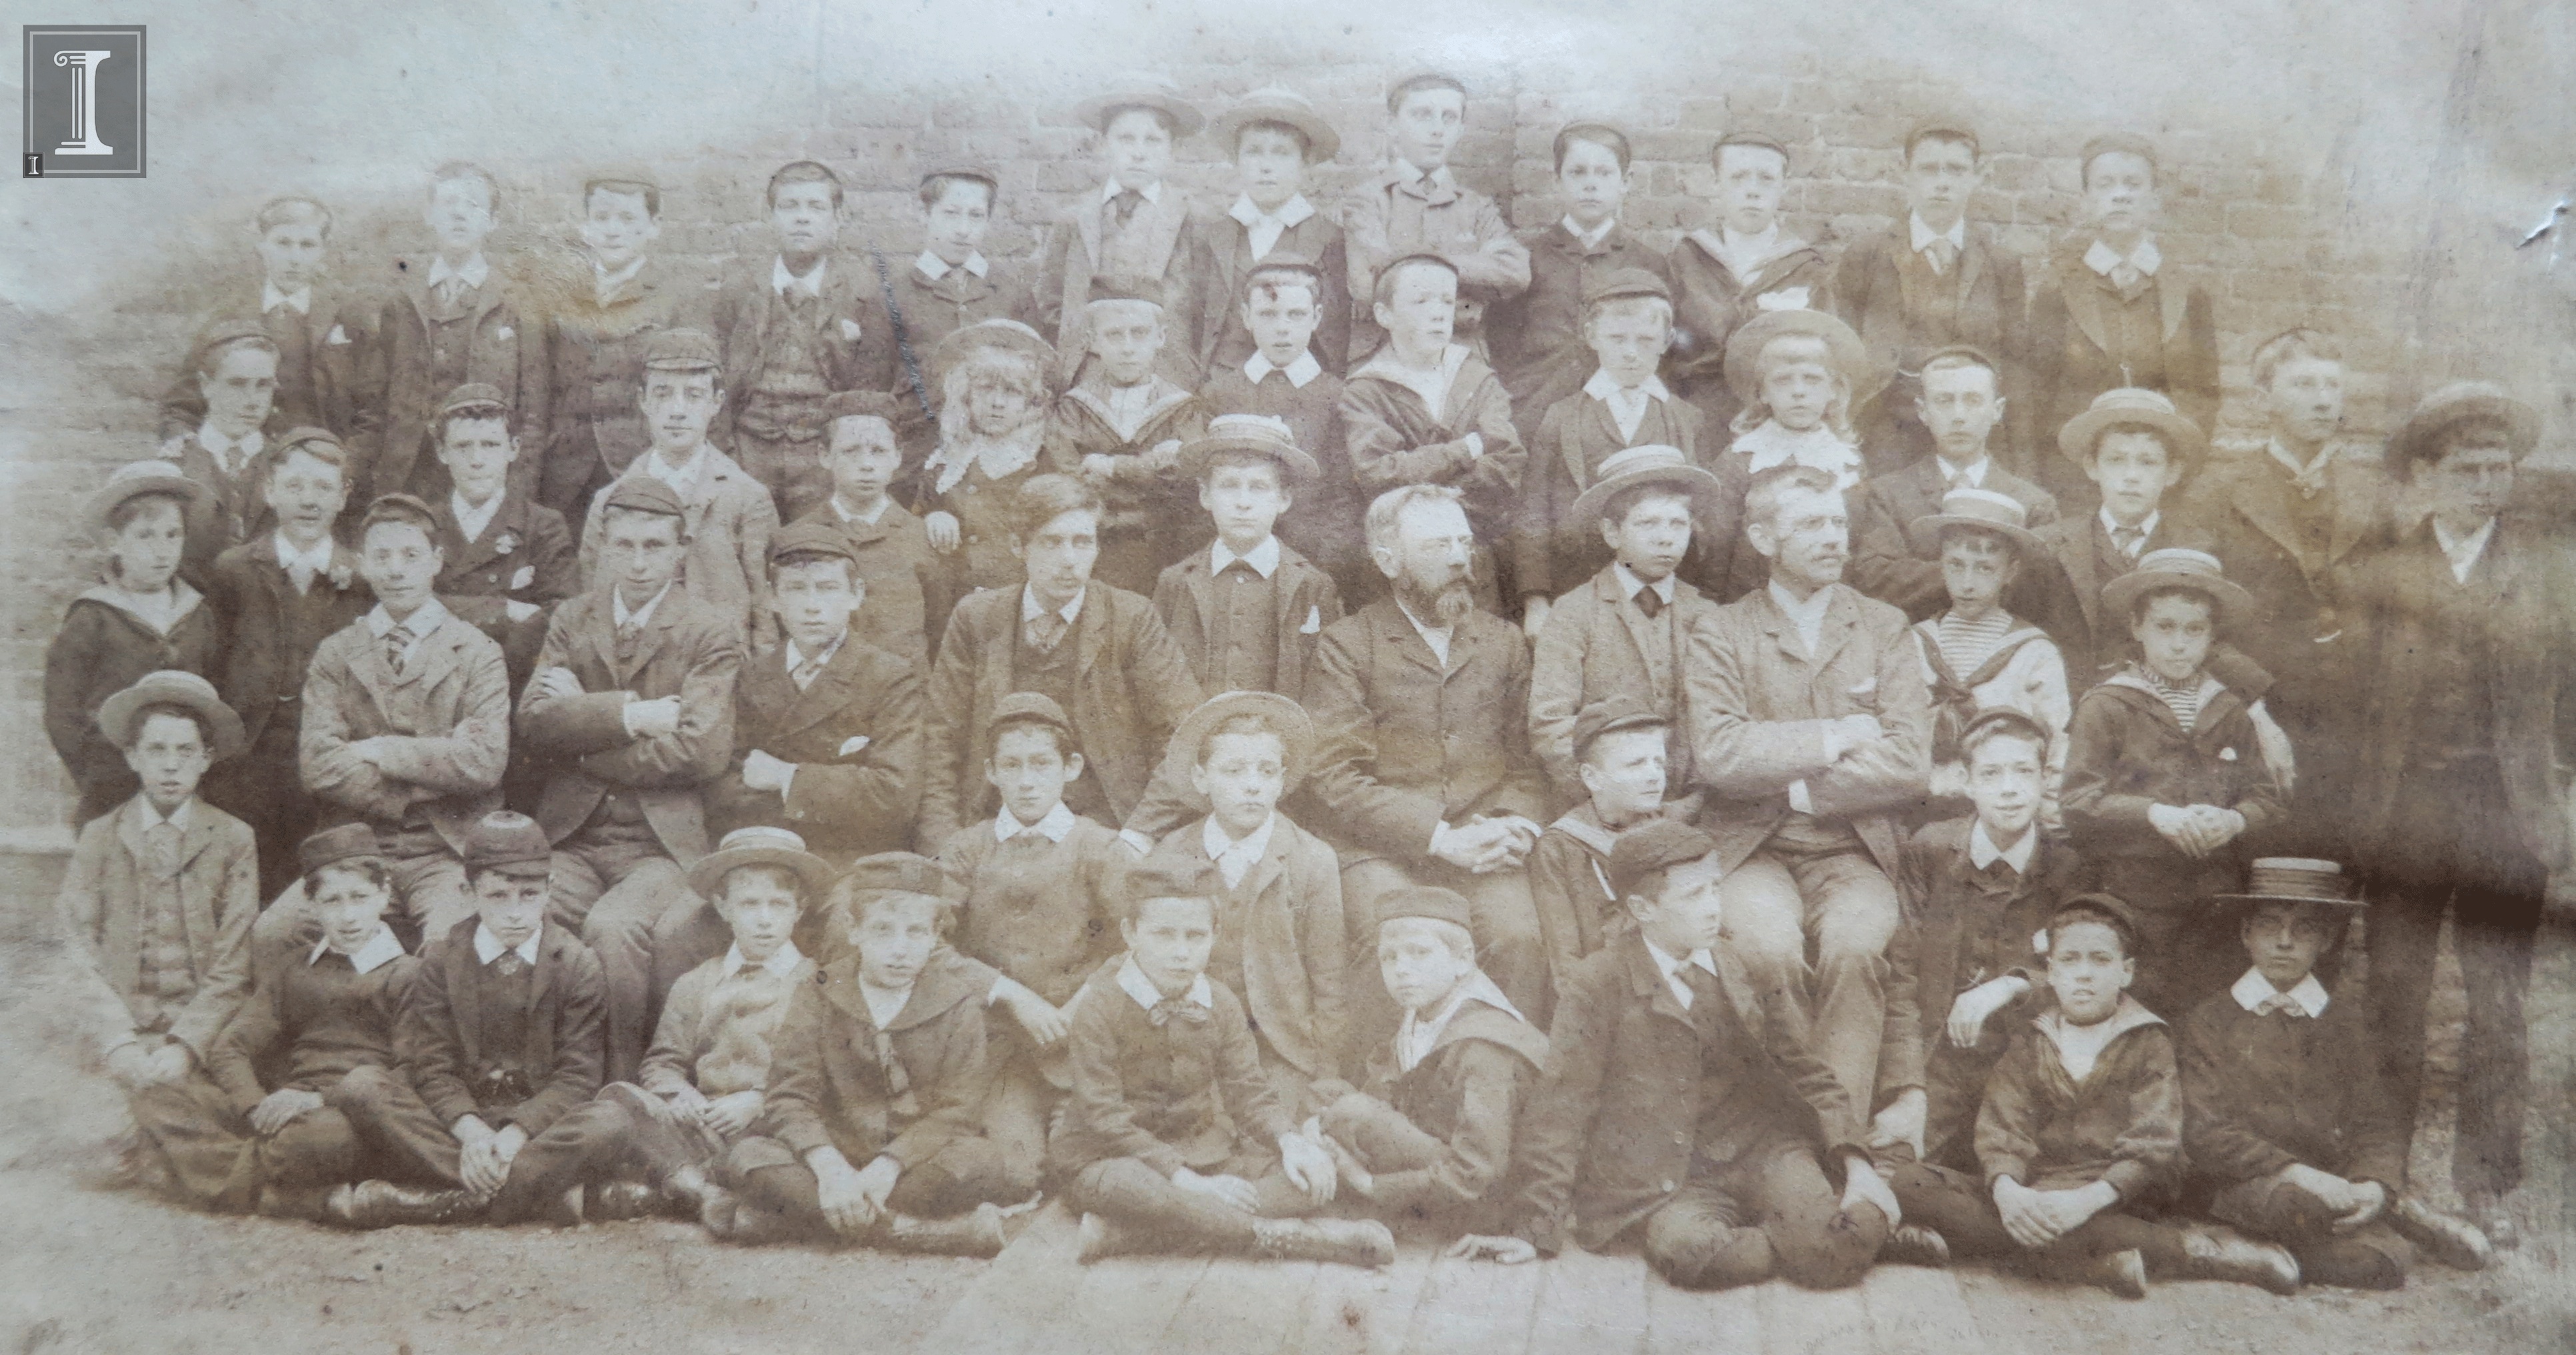 We think Milne and Wells are somewhere in this photo, a group shot of the students and teachers at Henley House School. Can you help us identify them? Milne would have been about eight years old and Wells about twenty-four. Photograph is glued to the front flyleaf of The Henley House School Magazine. London: Ford & Son, 1881-1893. WELLS 828 H389